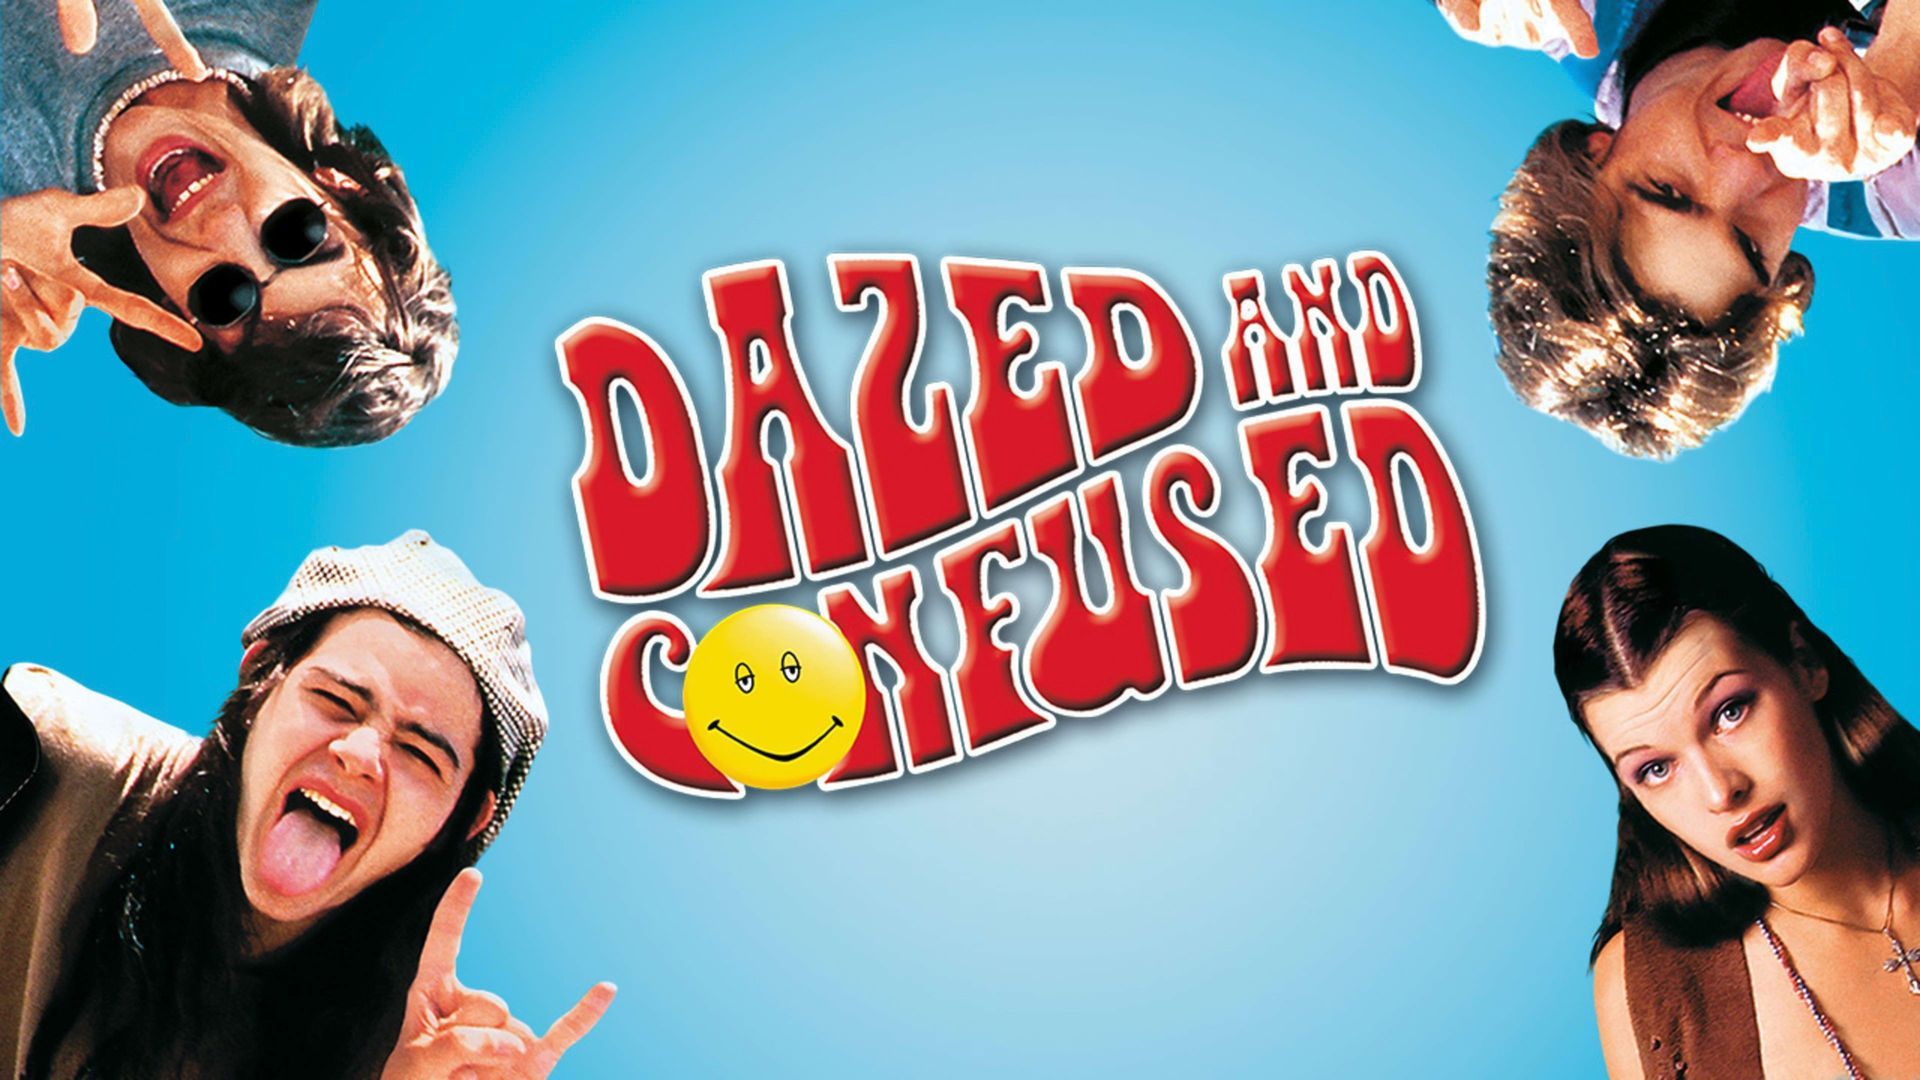 Watch Dazed and Confused (1993) Full Movie Online - Plex